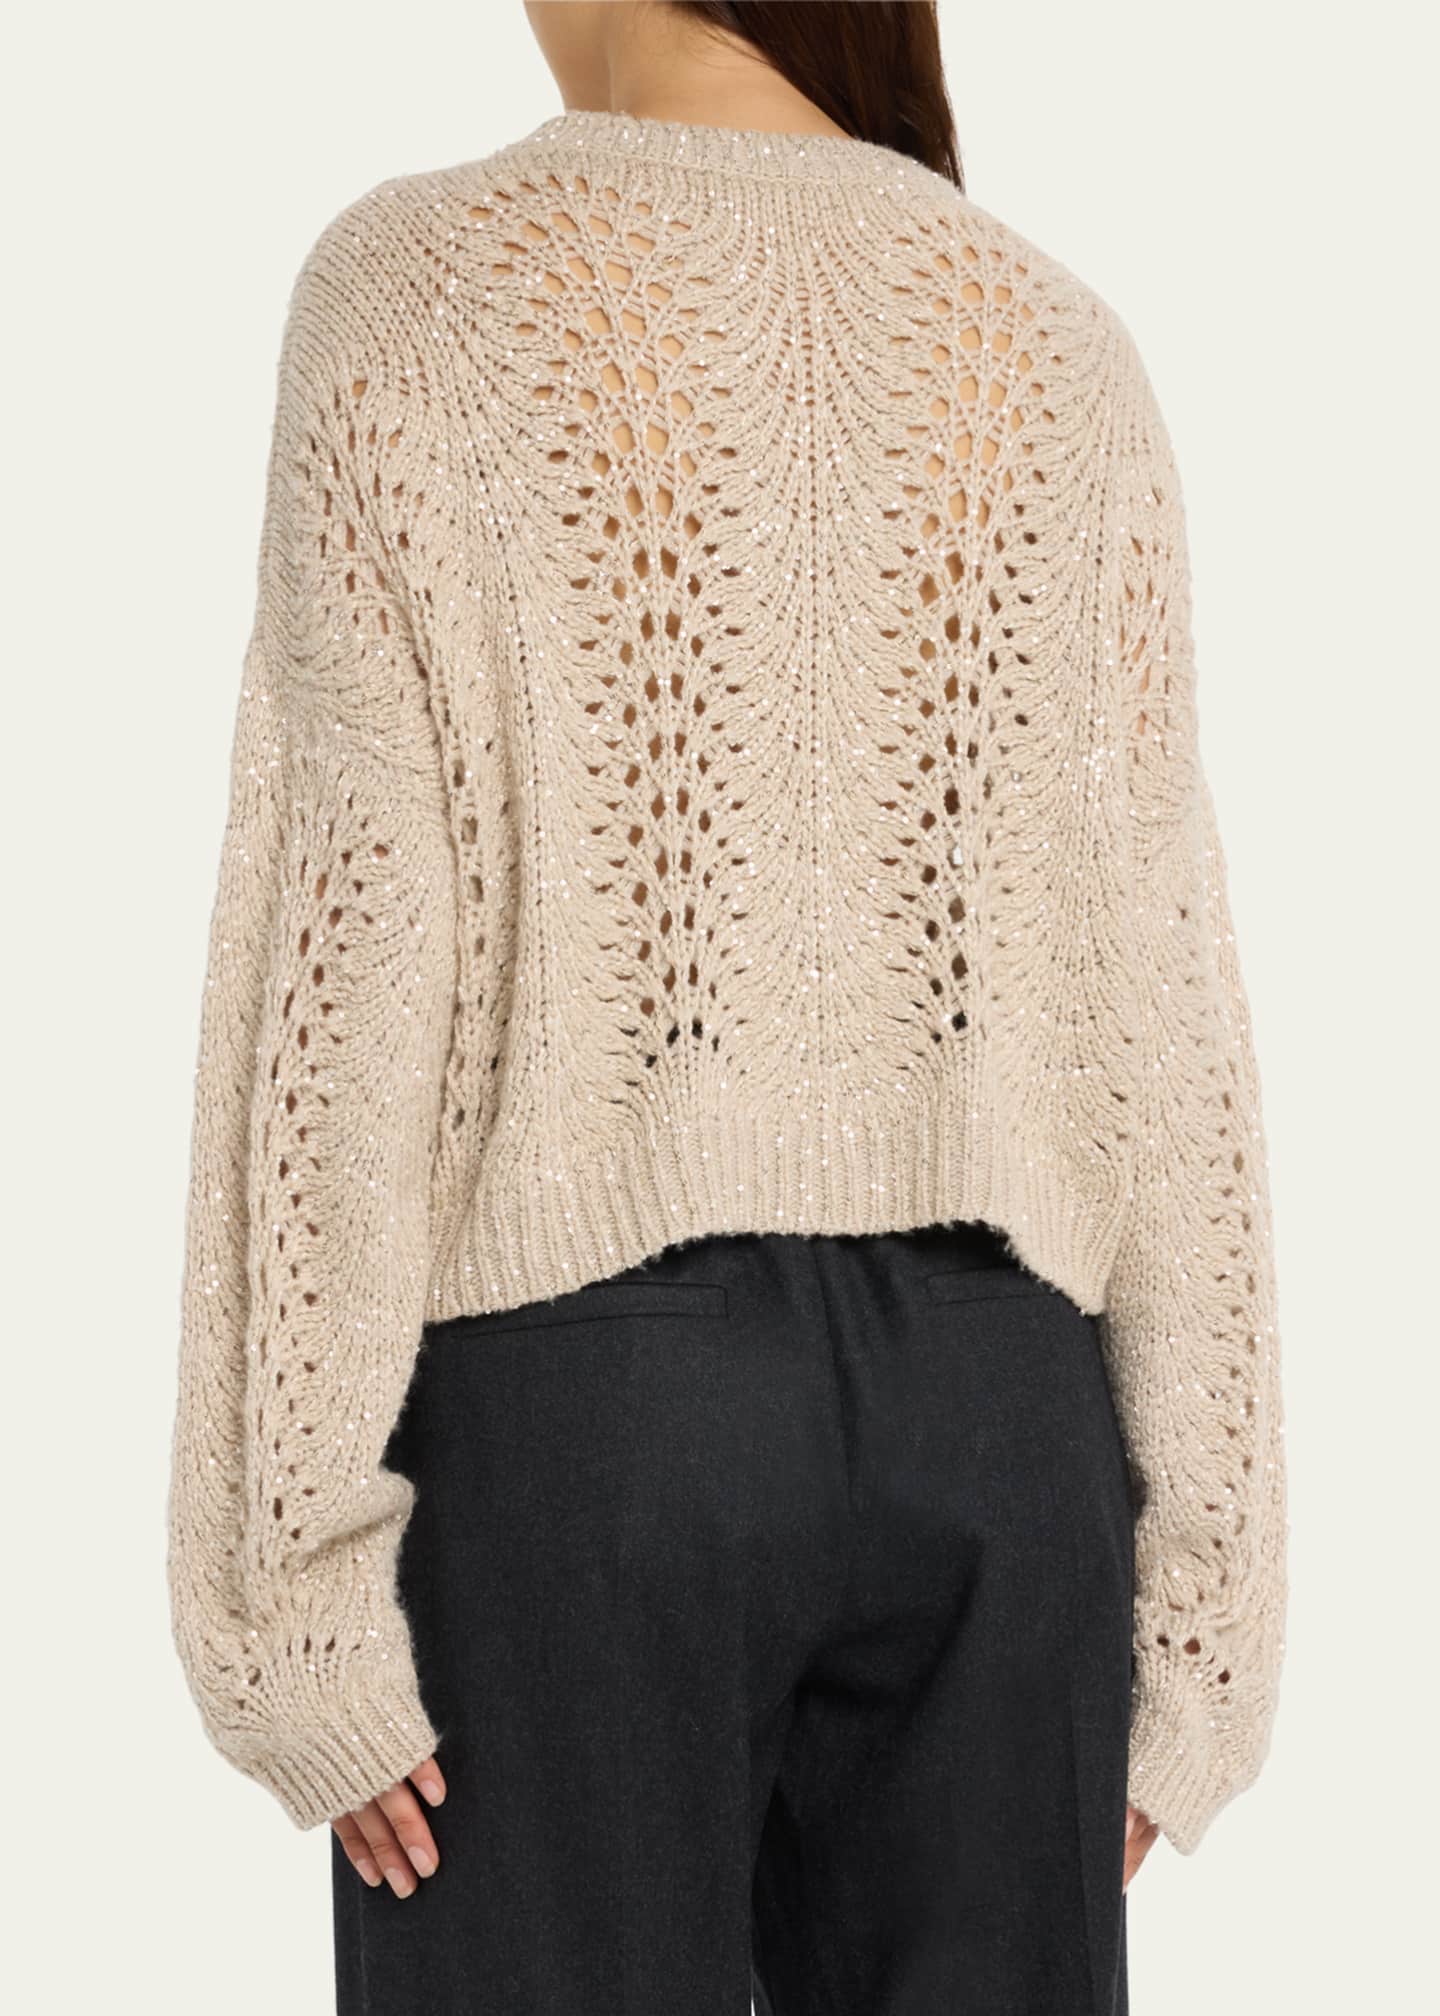 Brunello Cucinelli Cashmere Lace Knit Cropped Sweater with Micro Paillette  Detail - Bergdorf Goodman